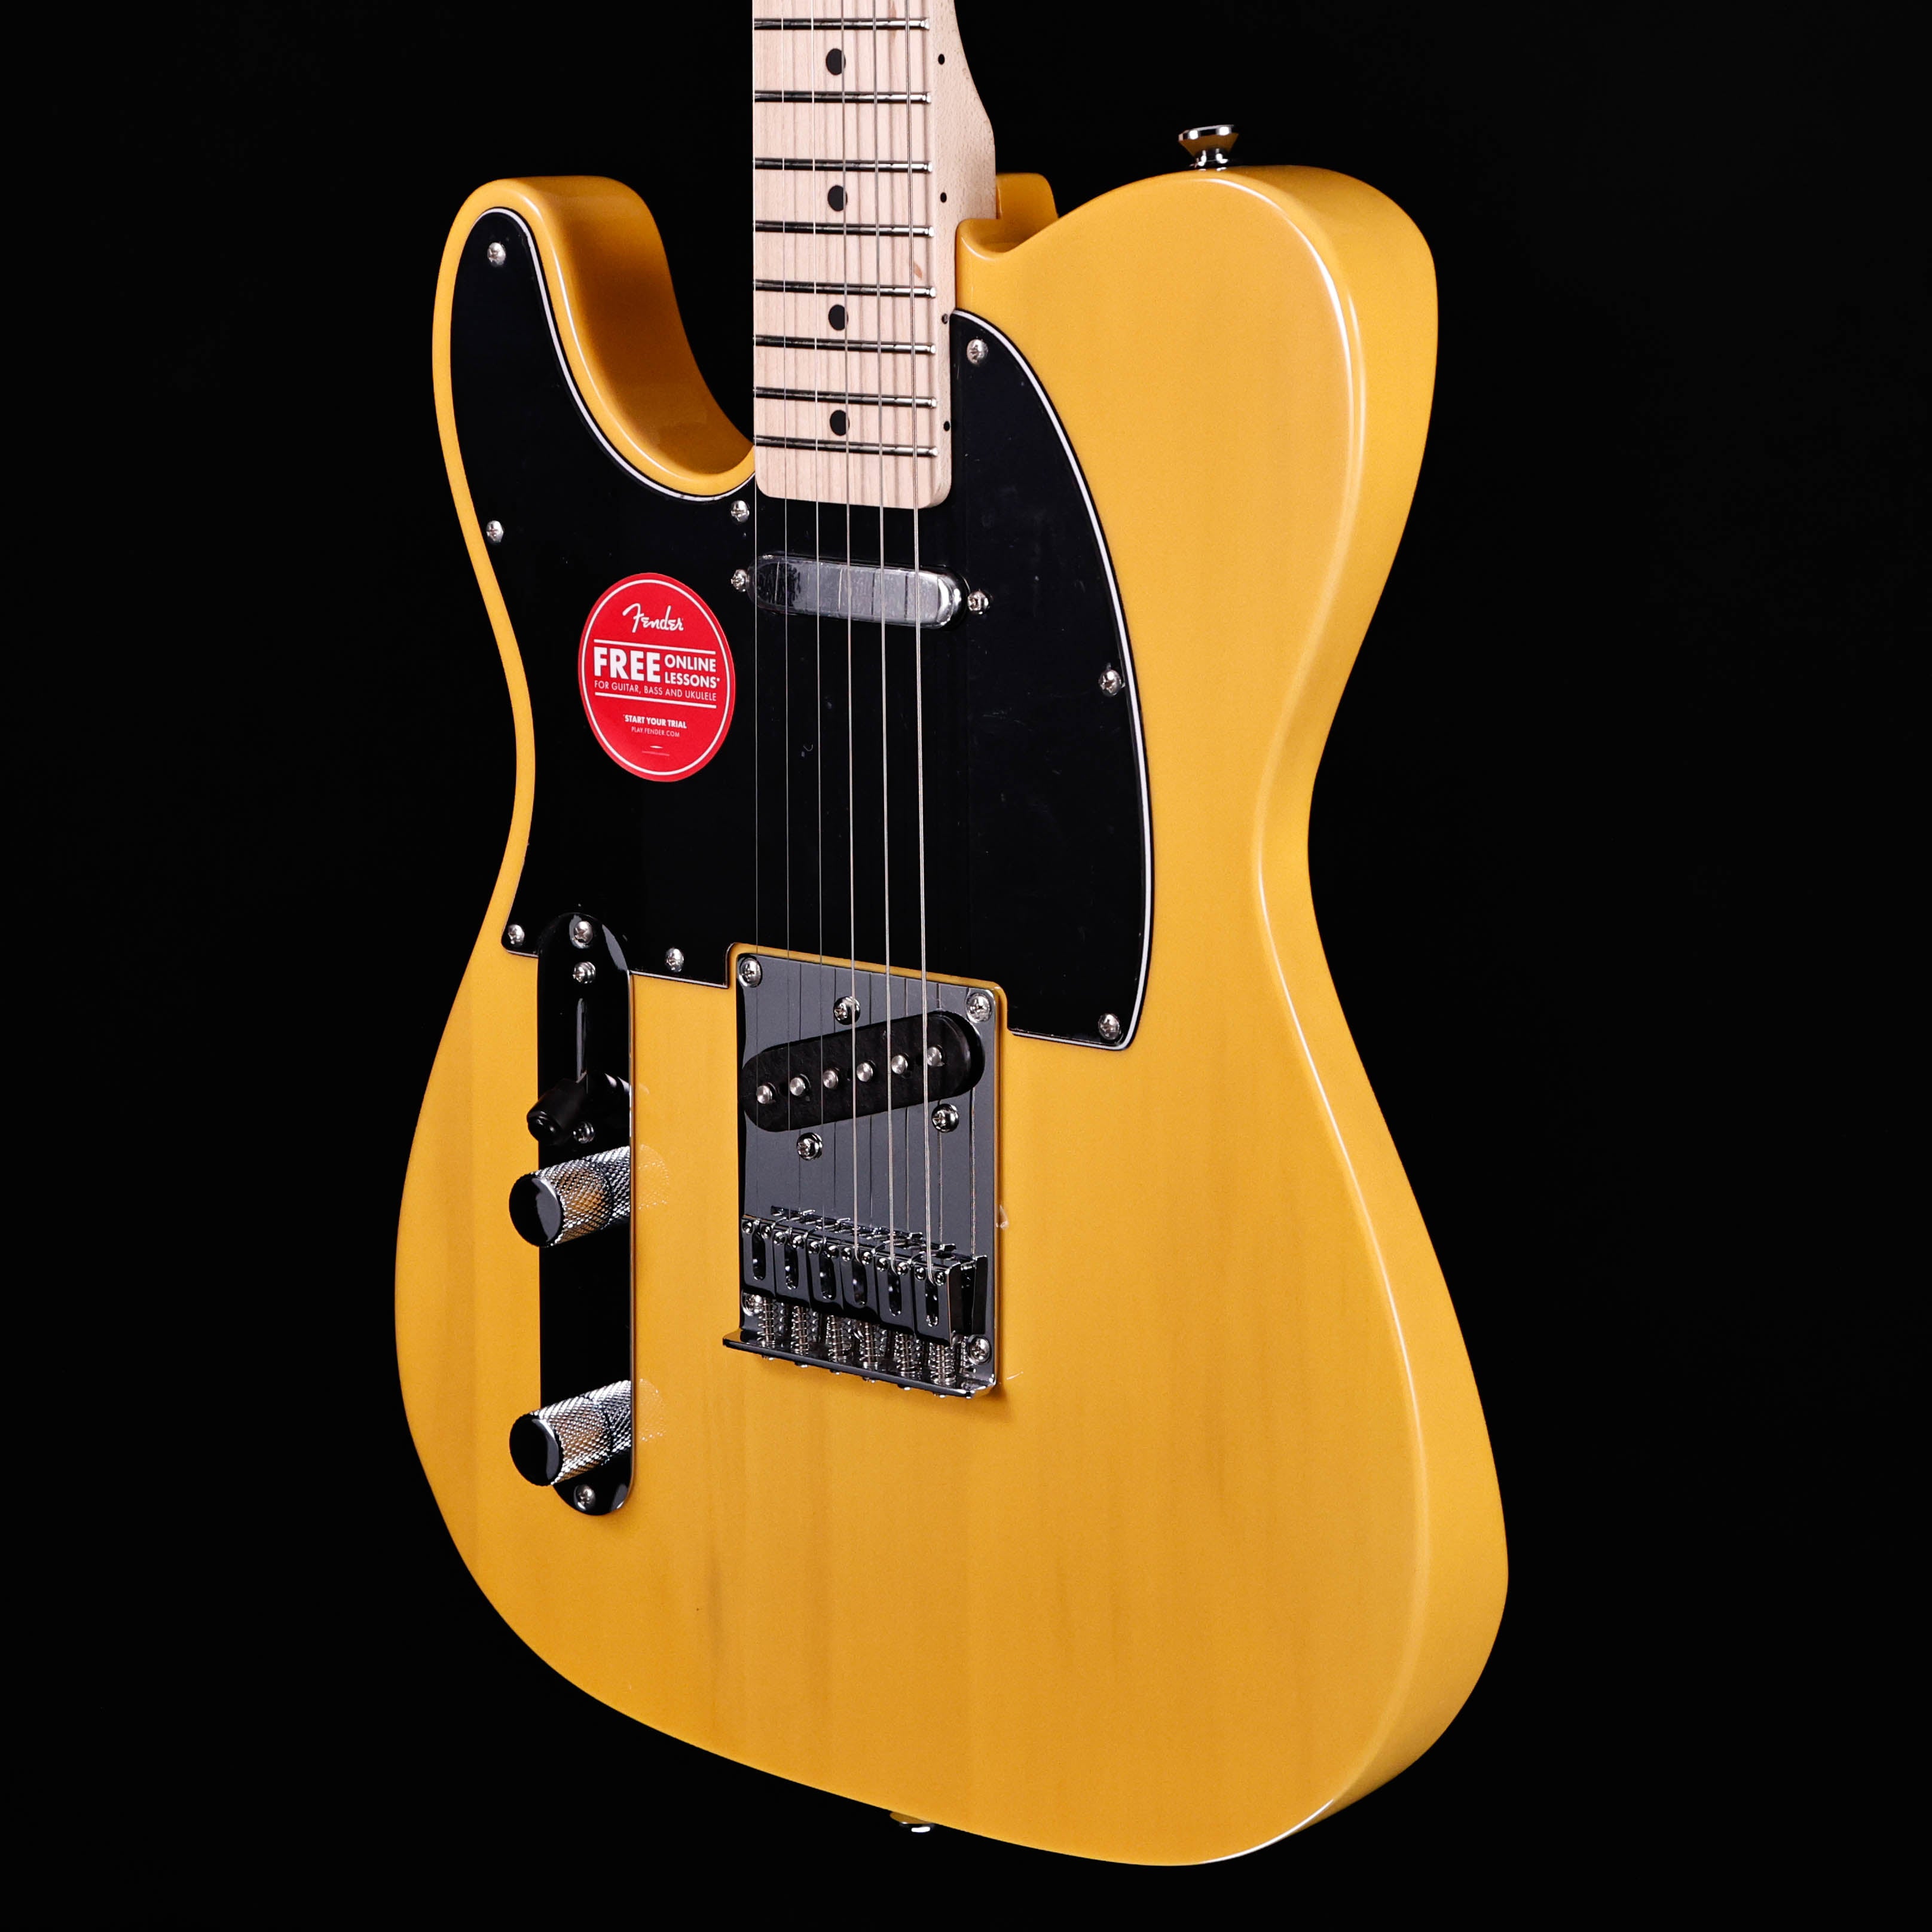 Squier Affinity Series Telecaster LH, BS Blonde 7lbs 1.1oz